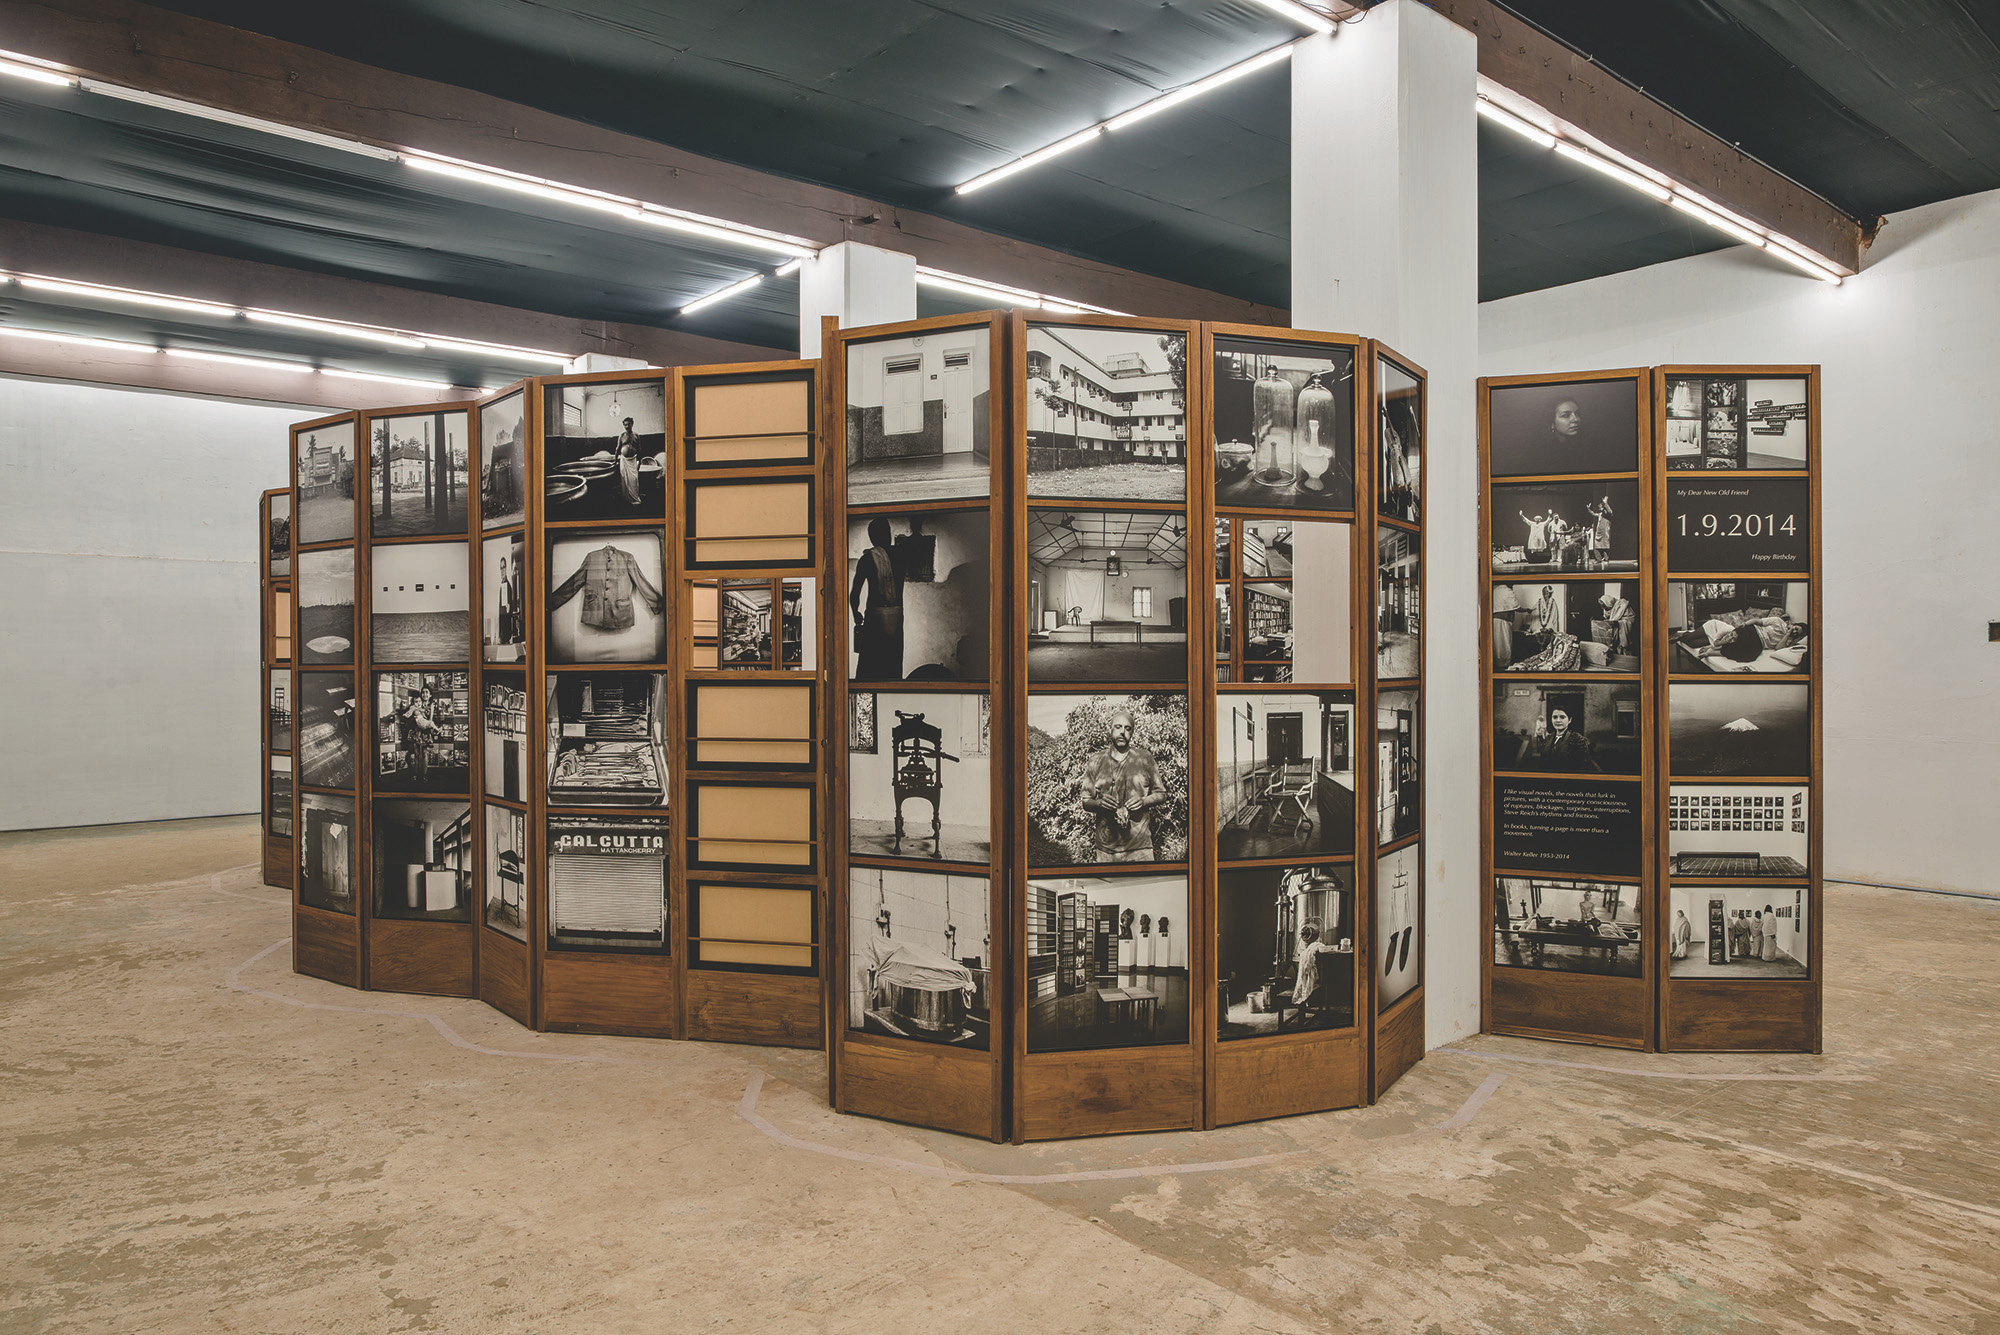 Dayanita Singh, ''1.9.2014 Dear Mr Walter,'' 2014. Teakwood structures with 196 inkjet prints. Dimensions variable. Installation view at Aspinwall House, Fort Kochi.